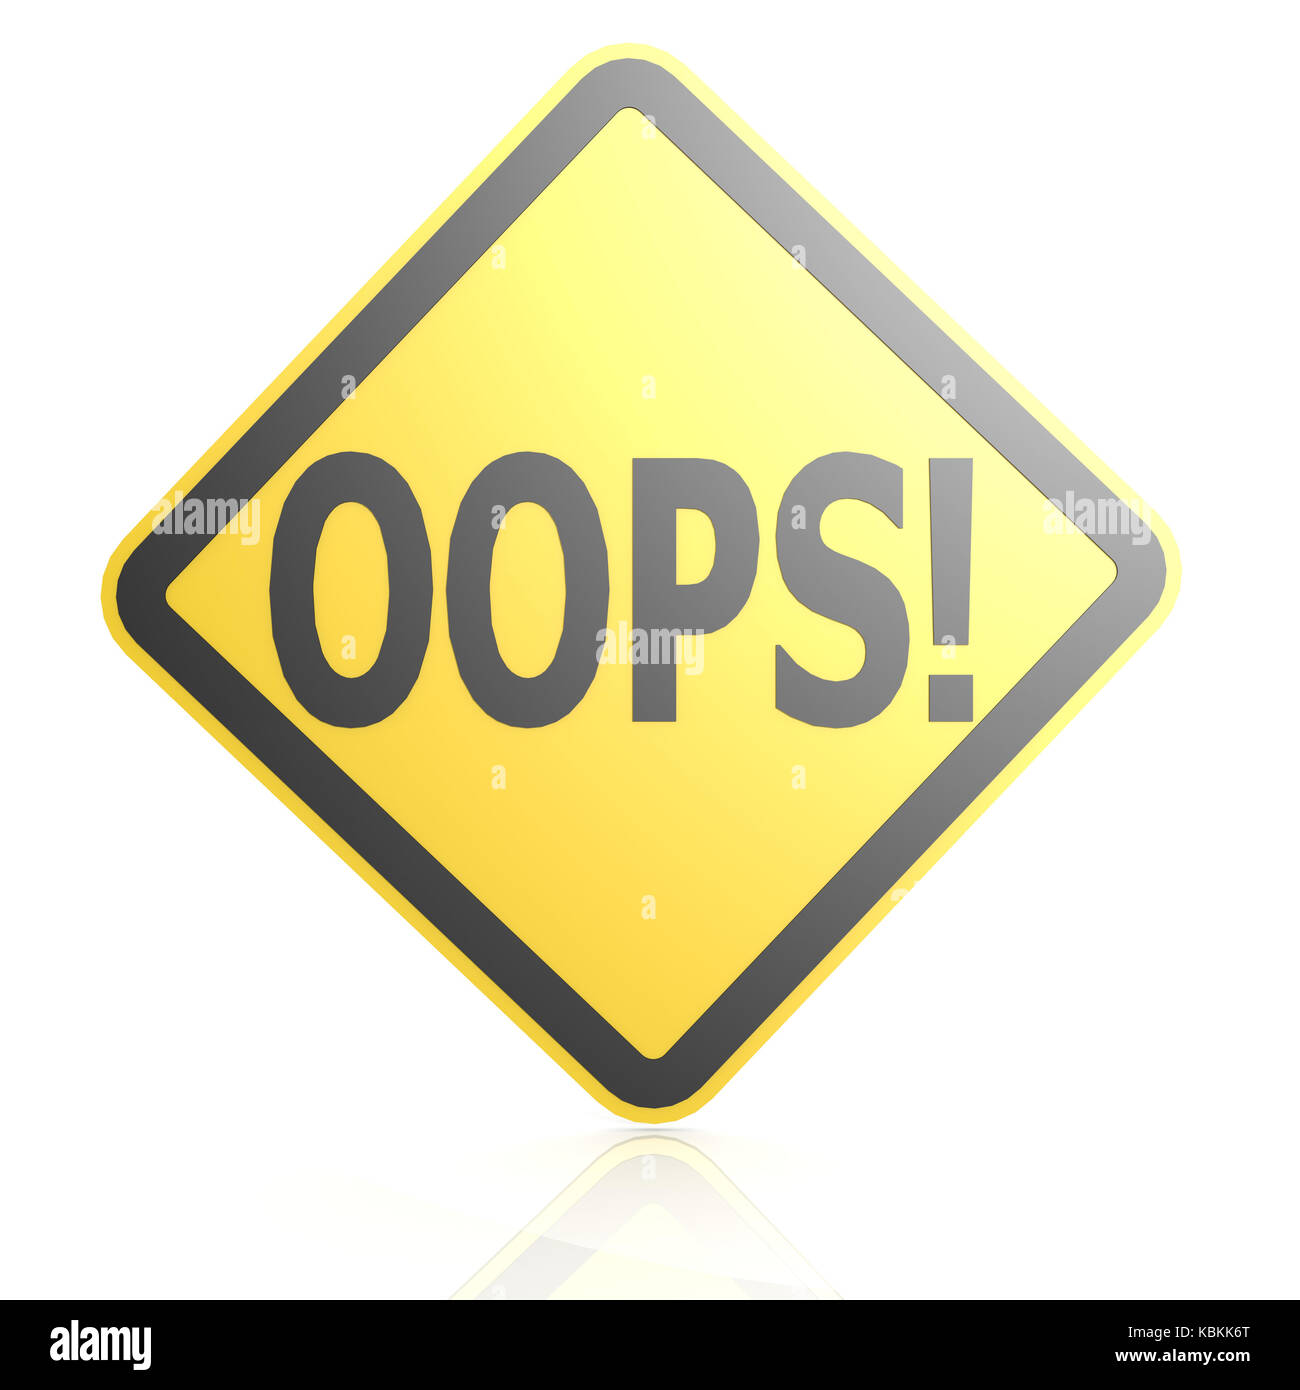 Oops sign board Stock Photo - Alamy